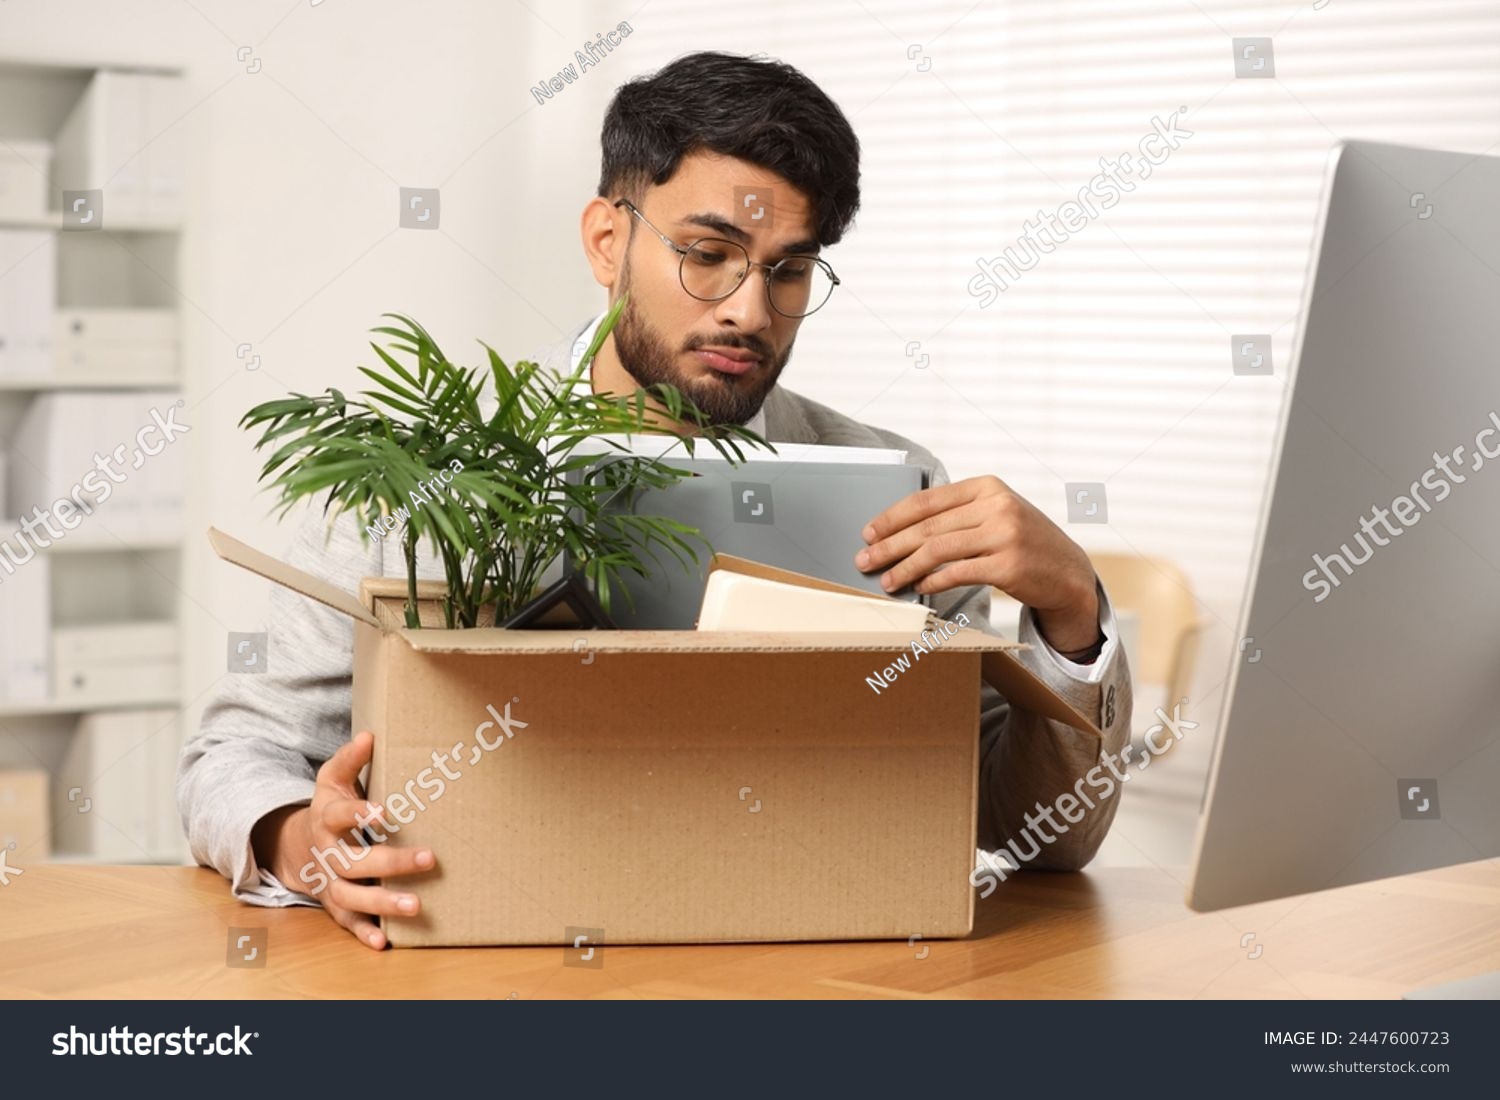 Unemployment problem. Frustrated man with box of personal belongings at desk in office #2447600723